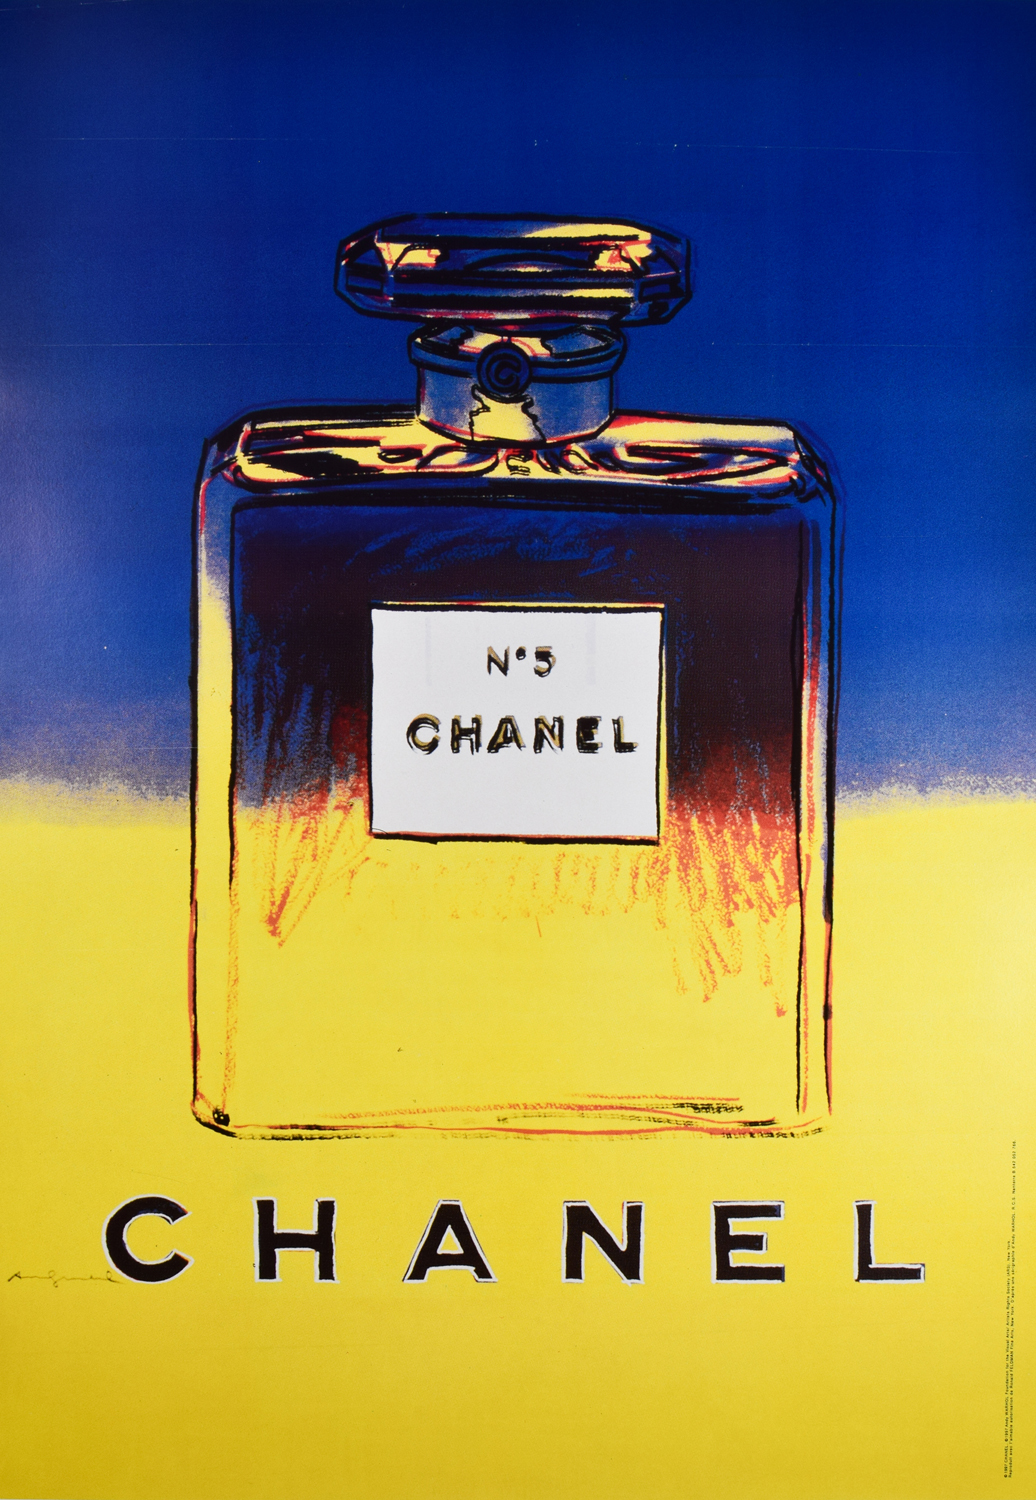 Chanel No 5 Blue Yellos Designed By Andy Warhol Modernism